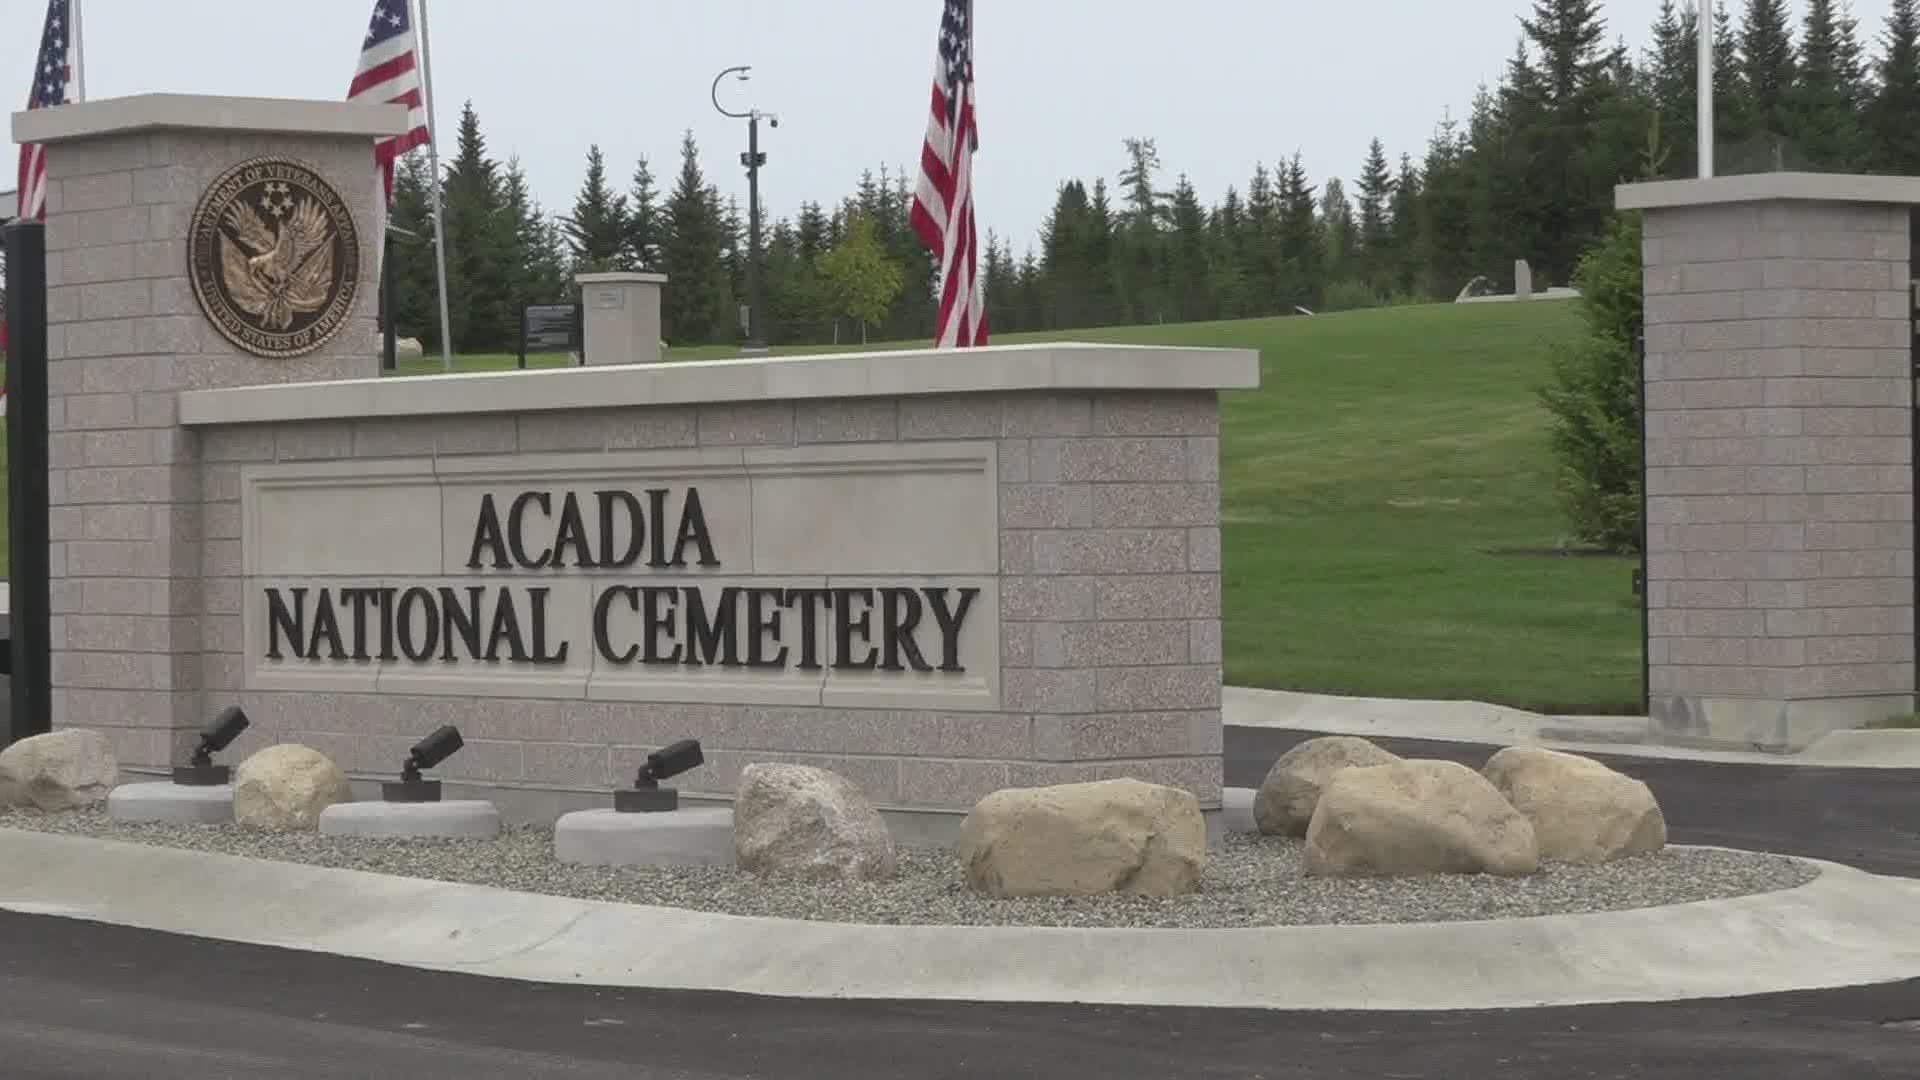 The U.S. Department of Veteran Affairs held a dedication ceremony today for the opening of Acadia National Cemetery in Jonesboro